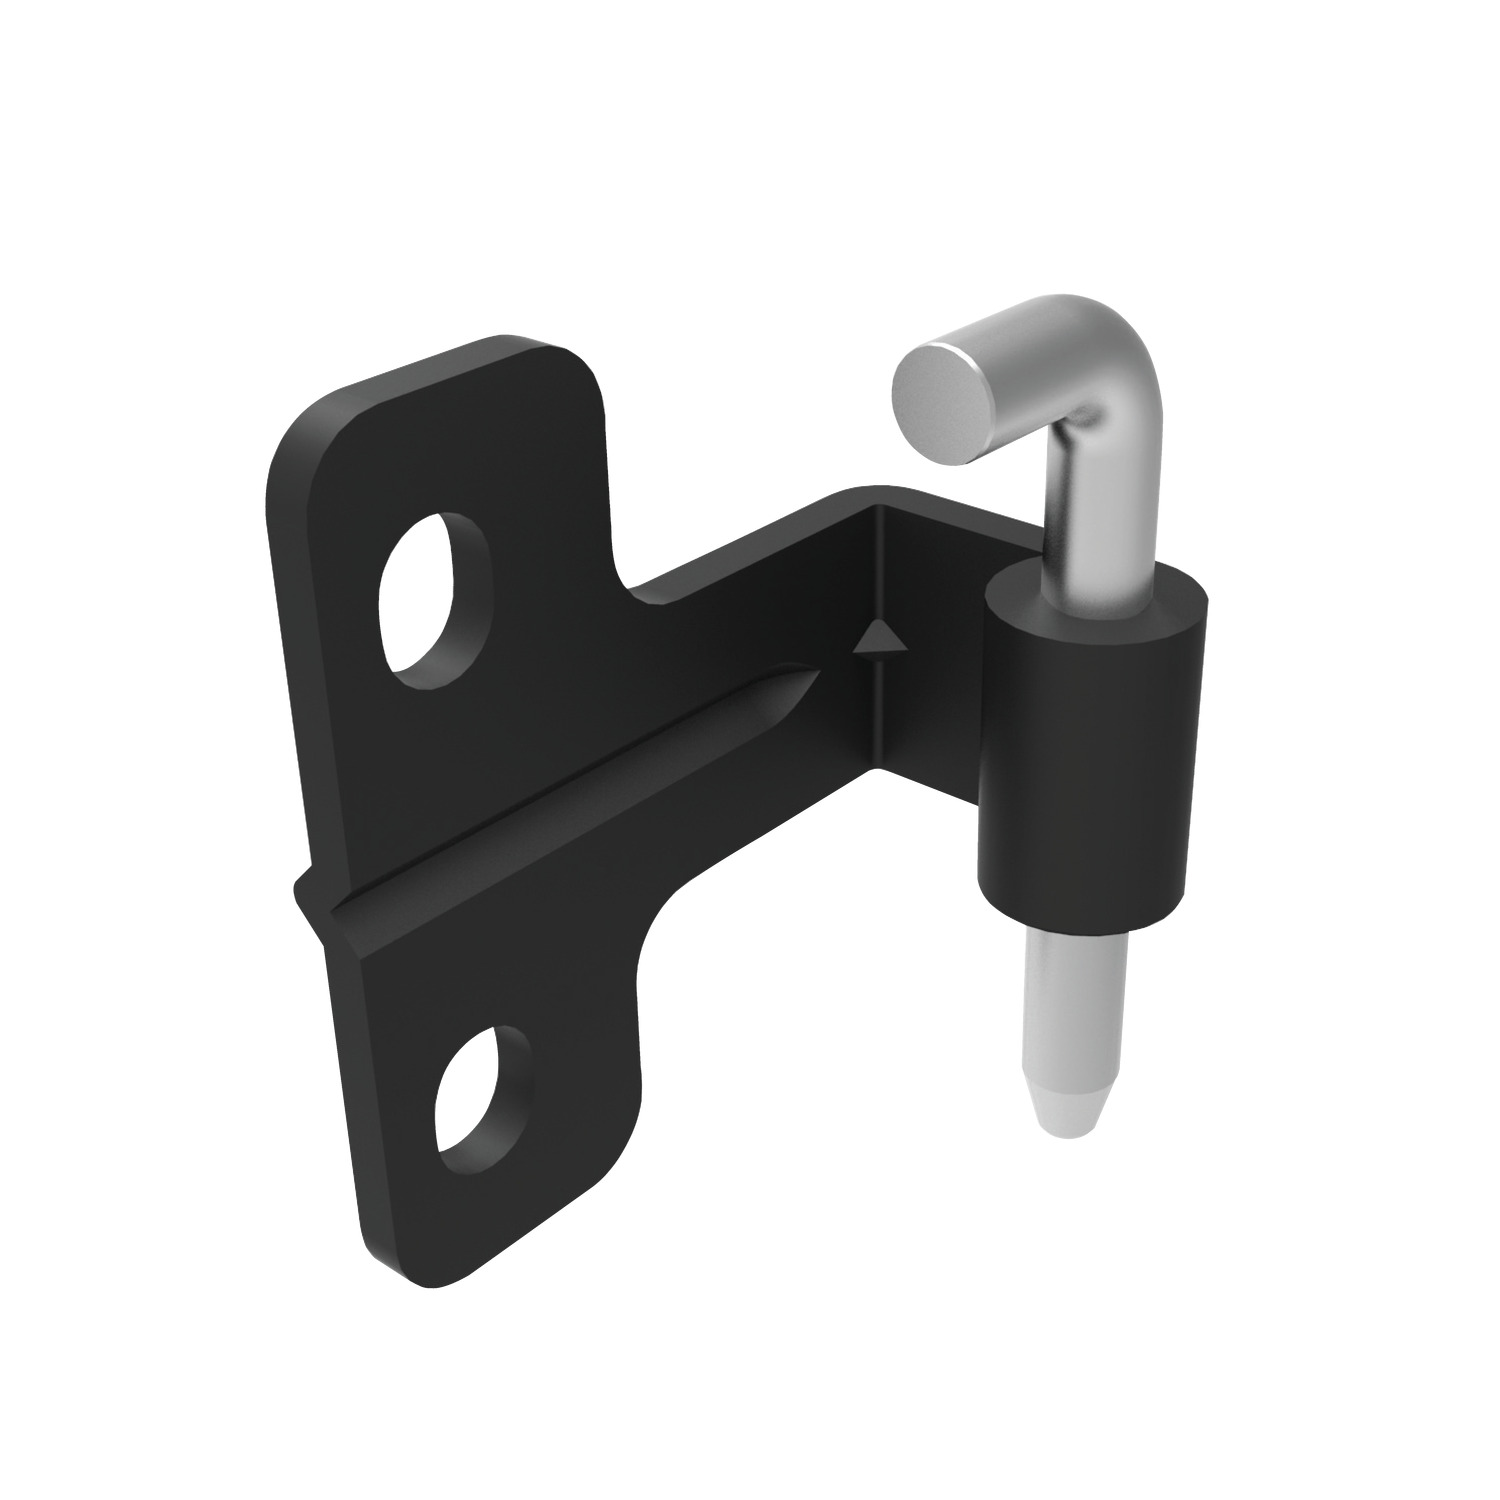 Concealed Pivot Hinges - Lift Off Concealed pivot hinges - lift off. For doors with a 21mm door return. Weld and oval head screw.